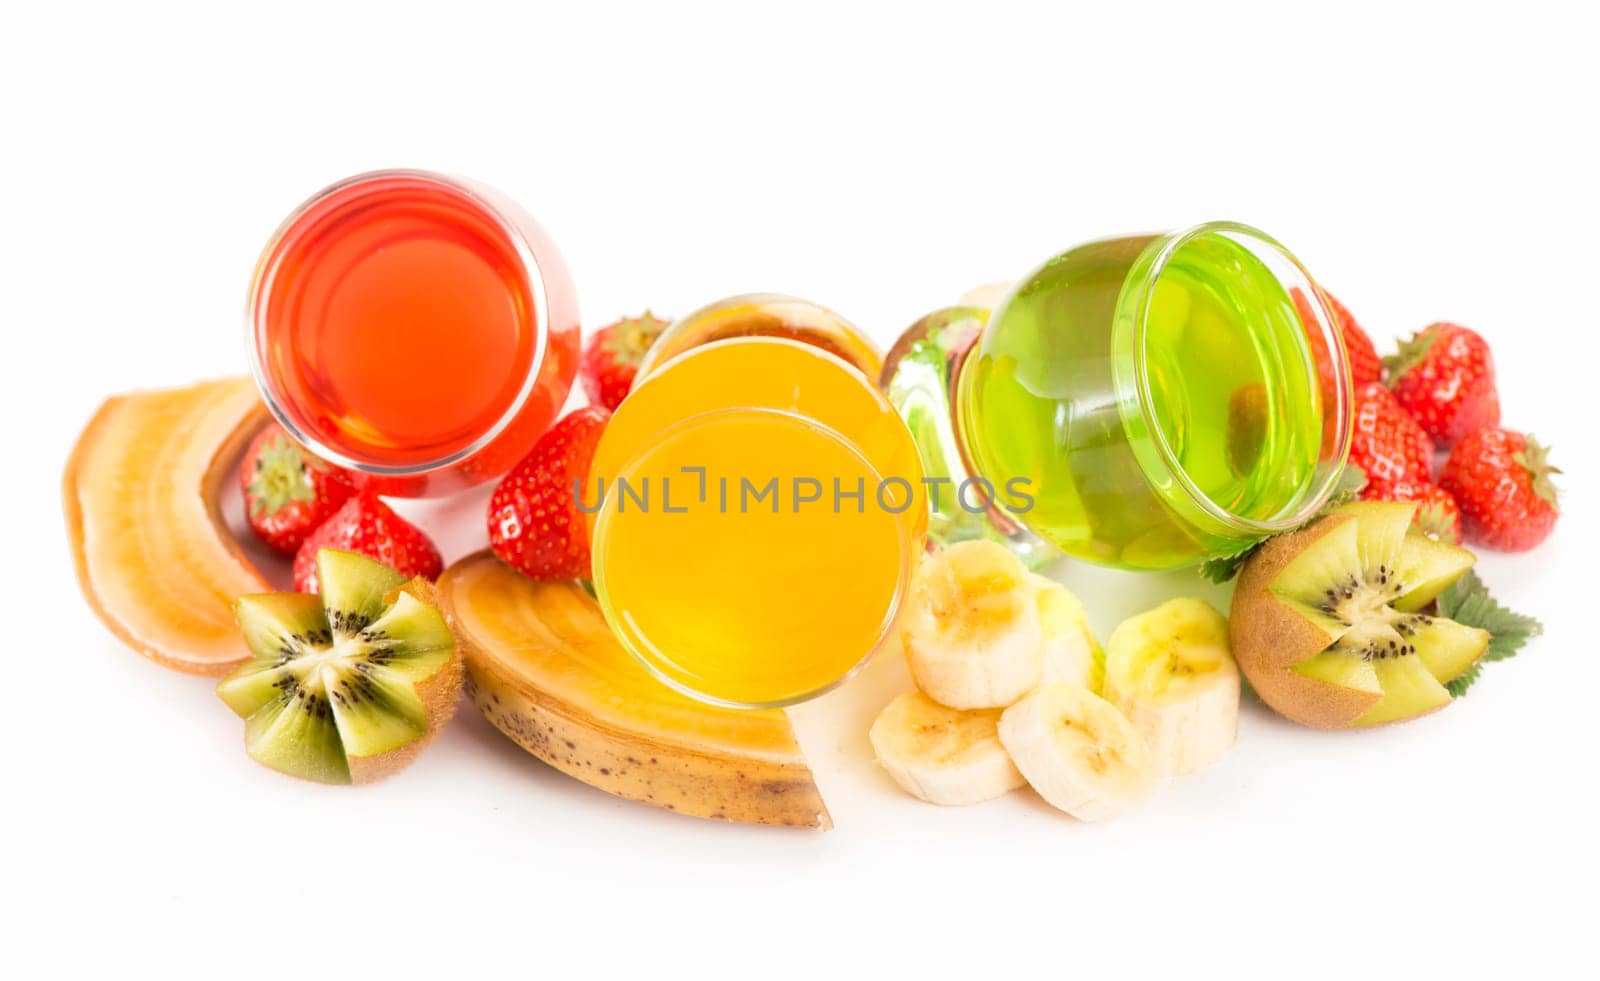 jelly with banana, kiwi and strawberry on a white background by aprilphoto